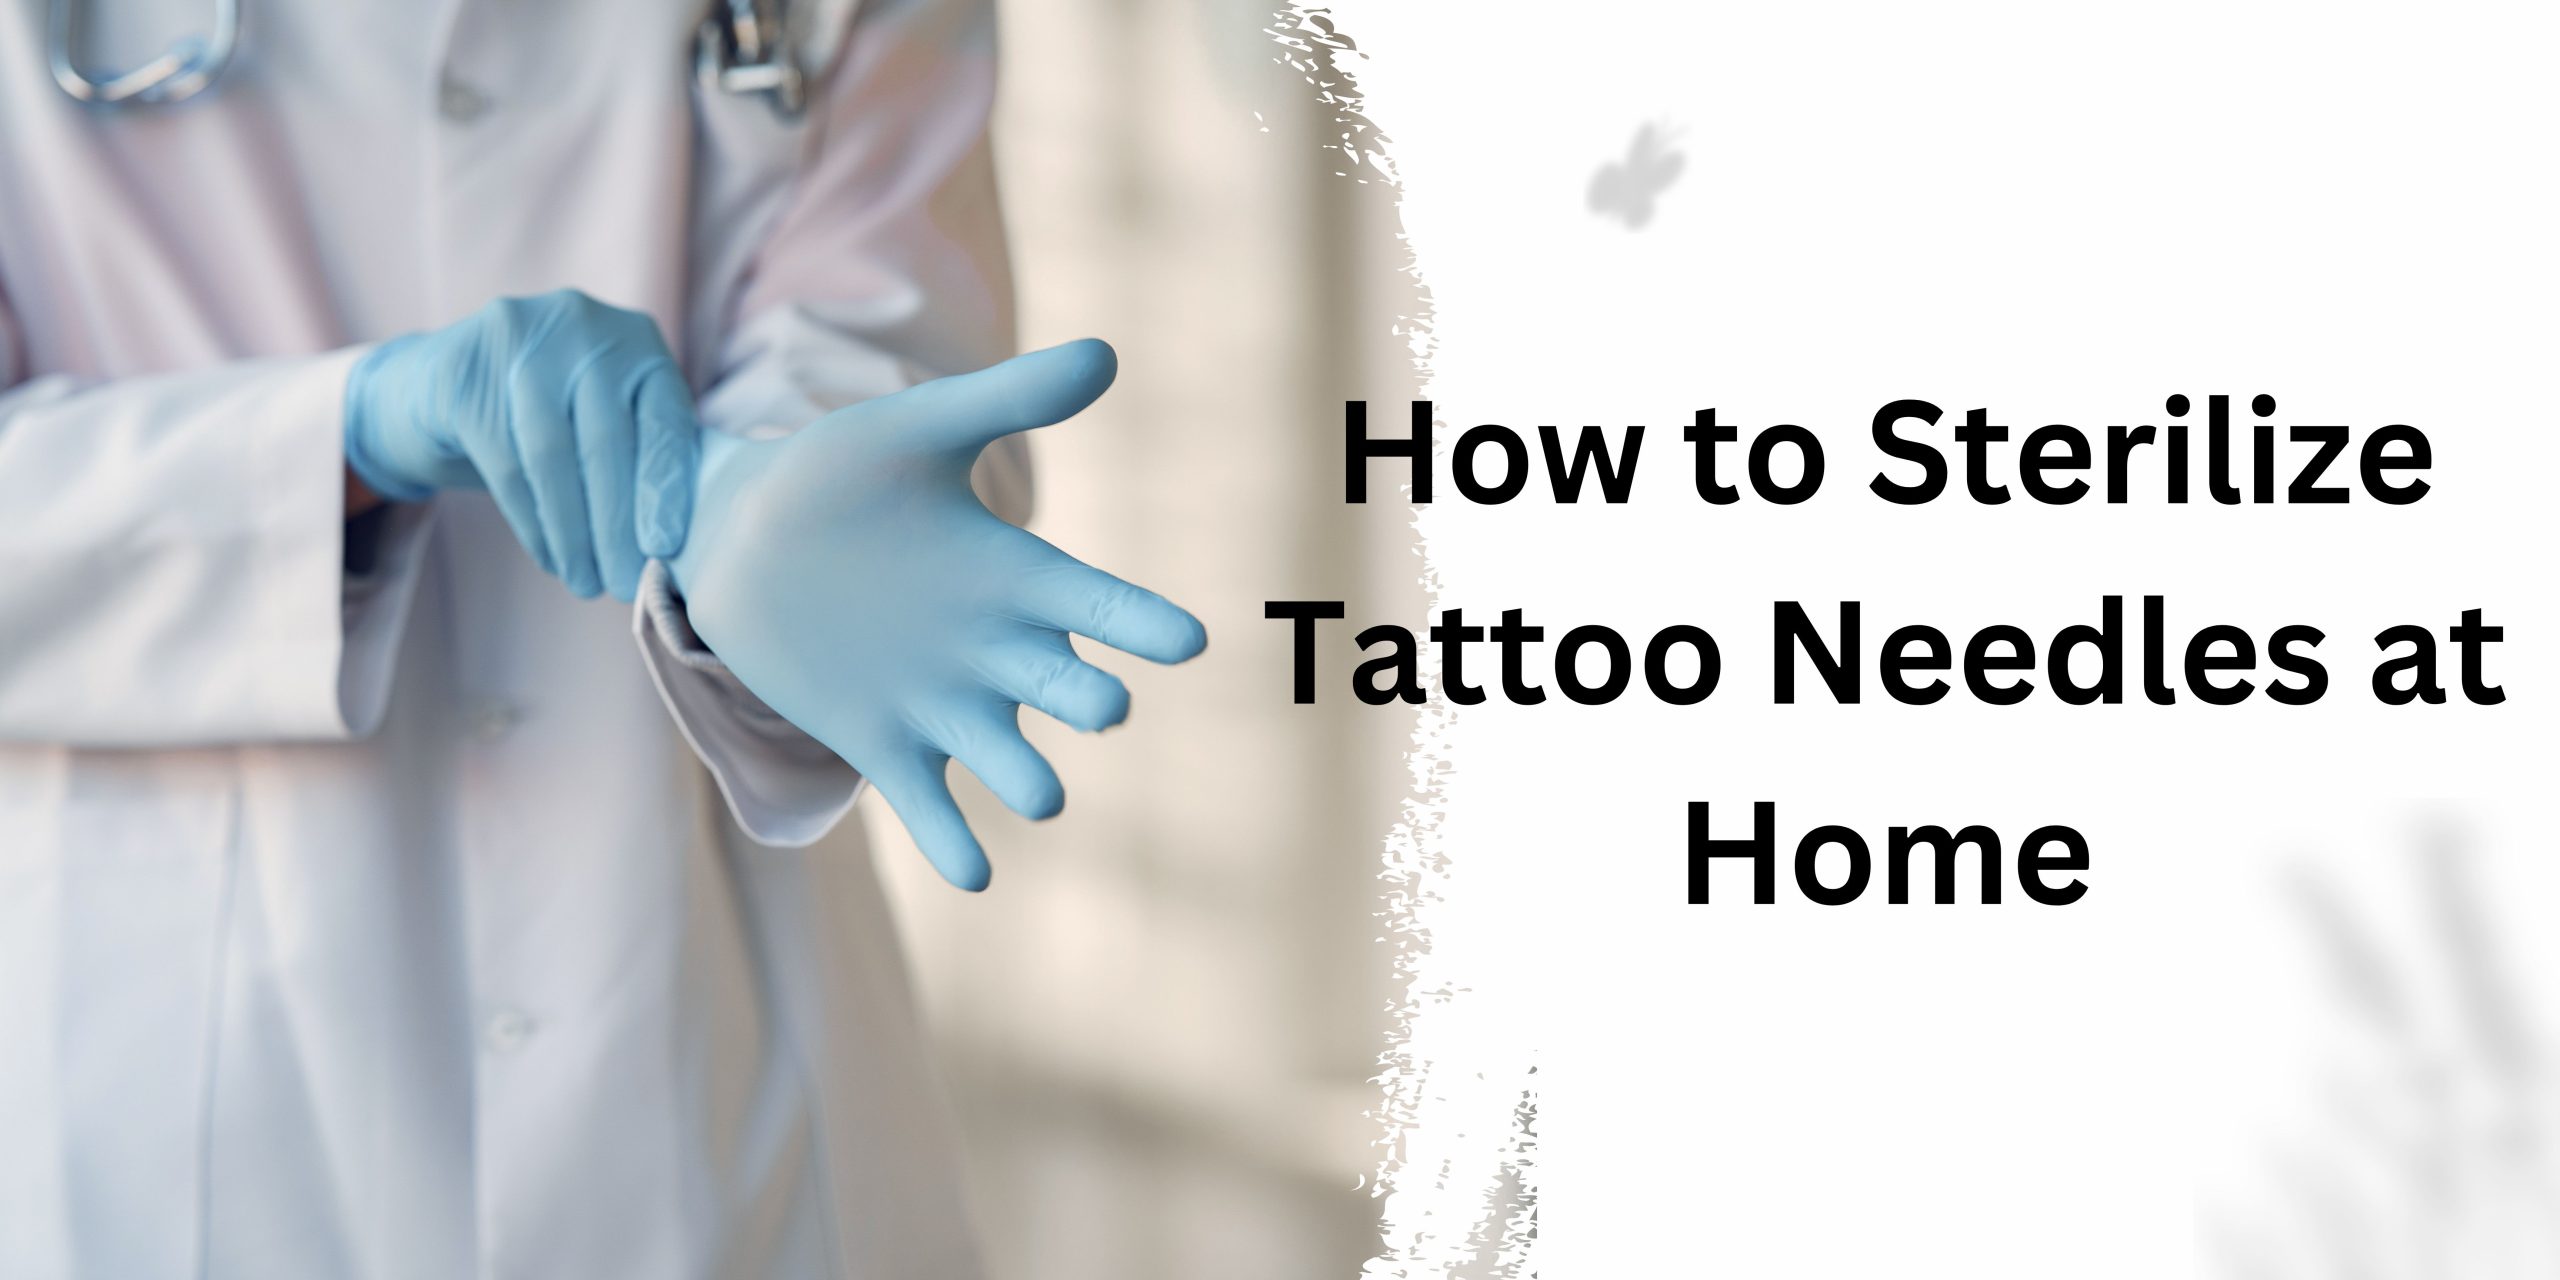 How to Sterilize Tattoo Needles at Home